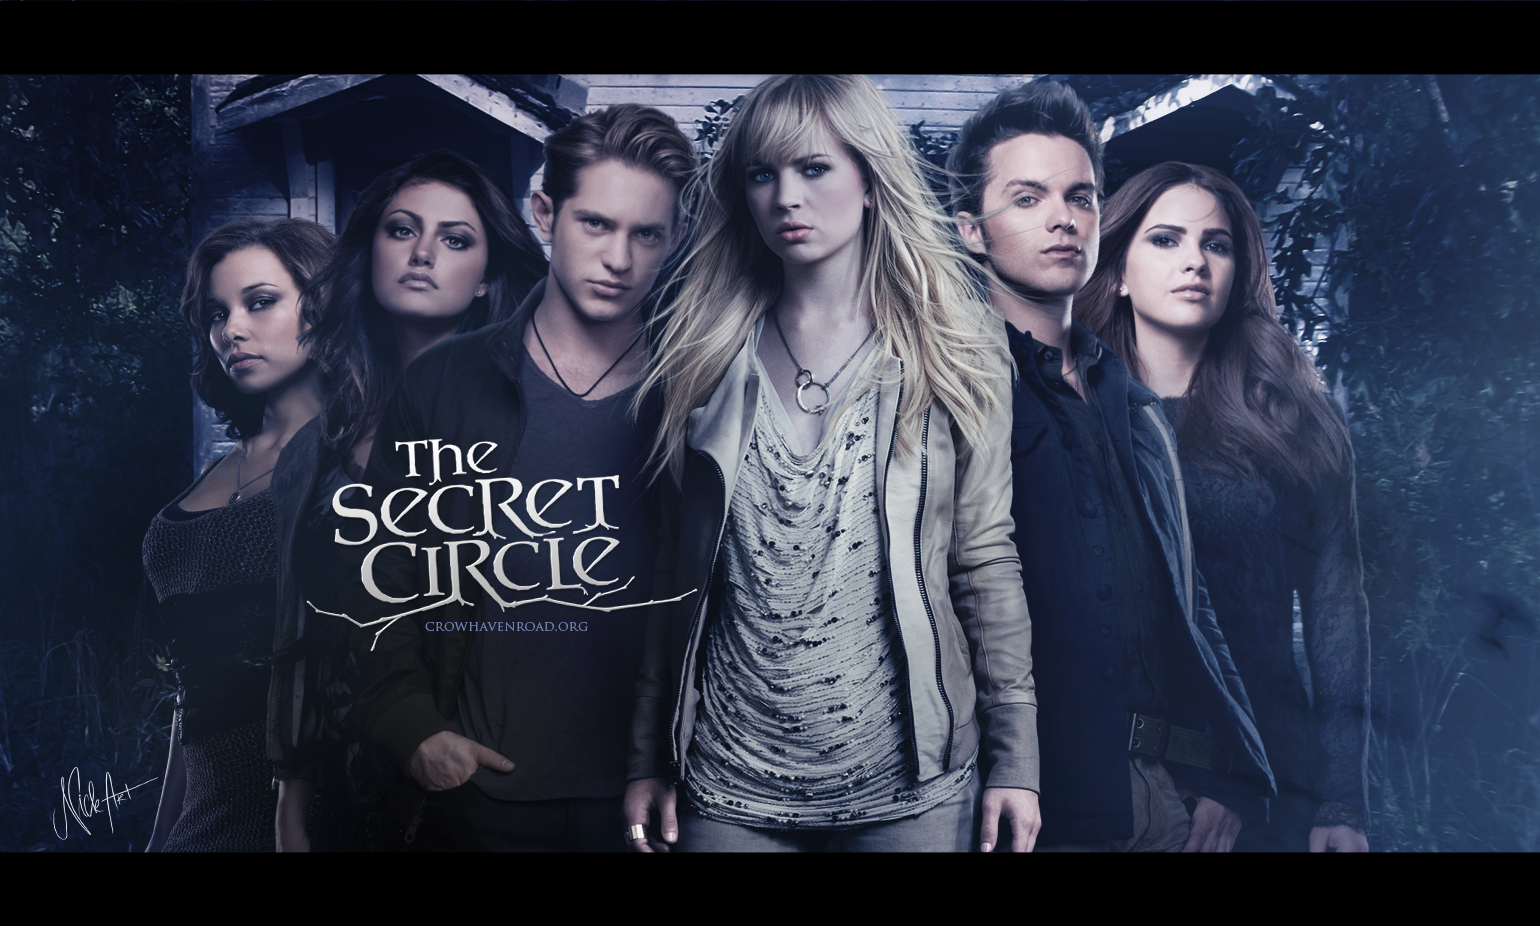 The Secret Circle Wallpapers